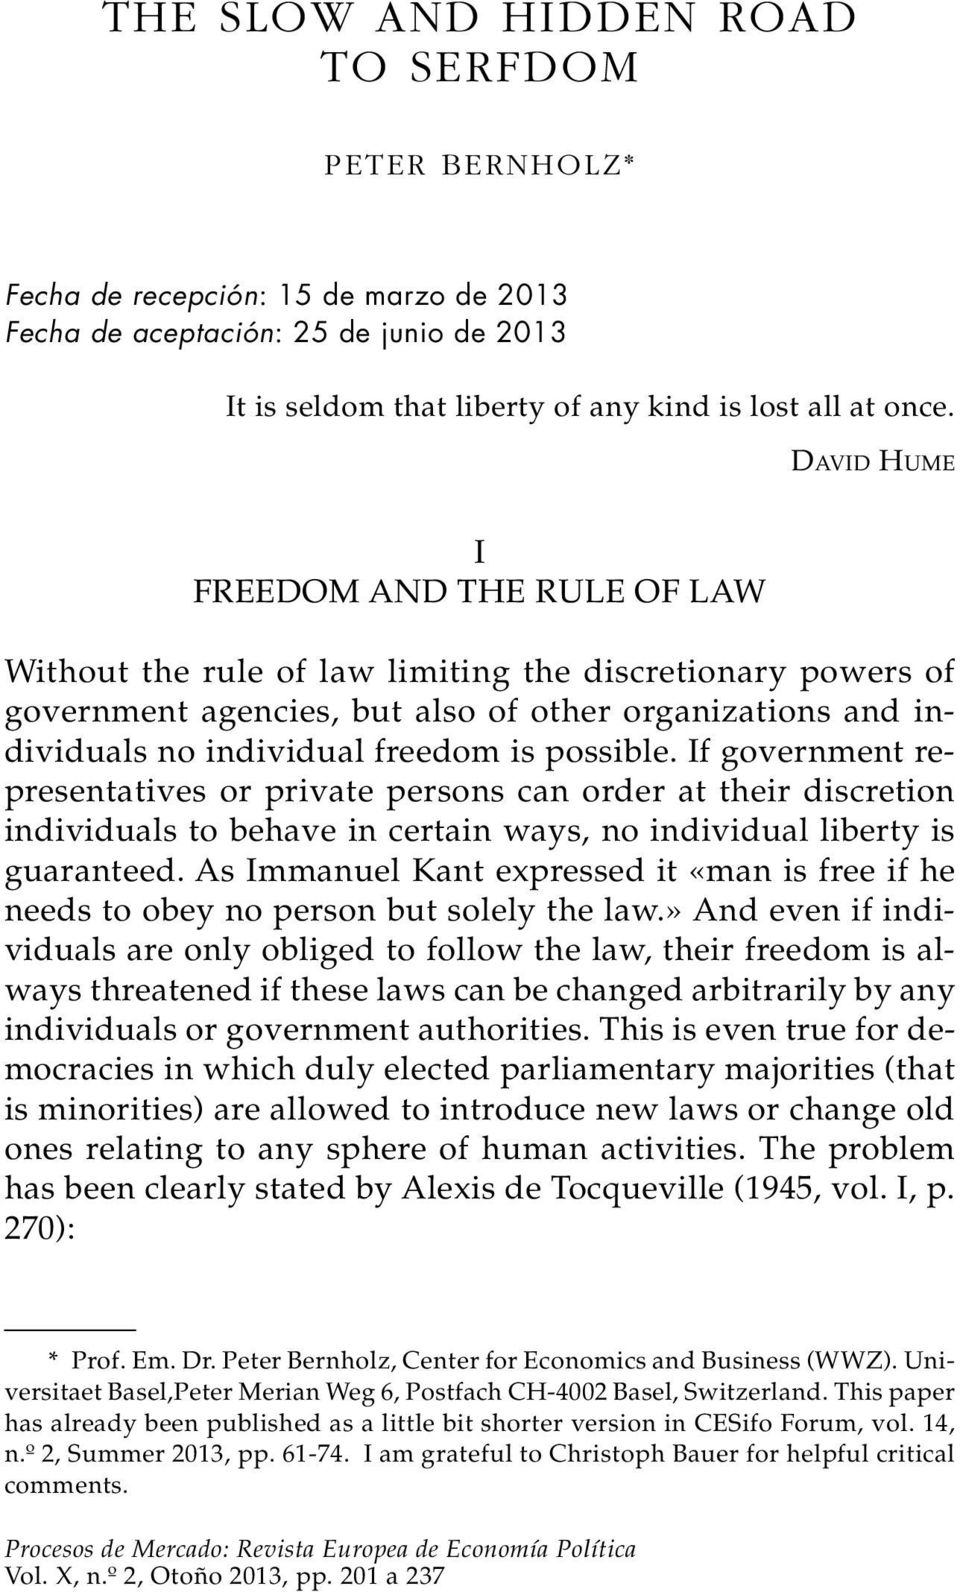 possible. If government re - presentatives or private persons can order at their discretion individuals to behave in certain ways, no individual liberty is guaranteed.